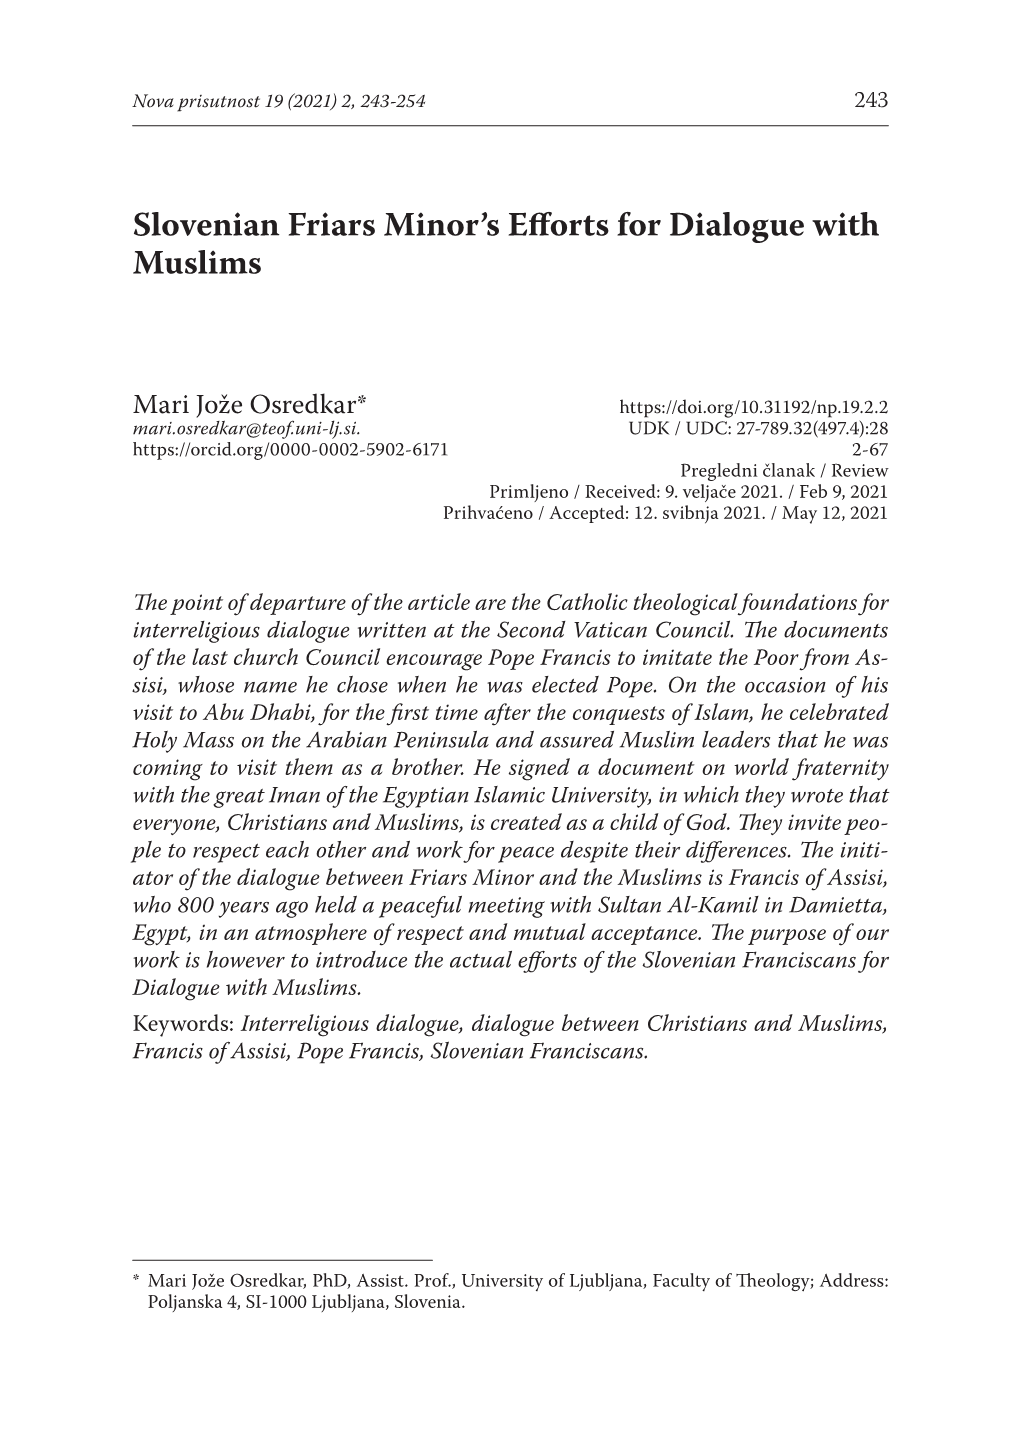 Slovenian Friars Minor's Efforts for Dialogue with Muslims